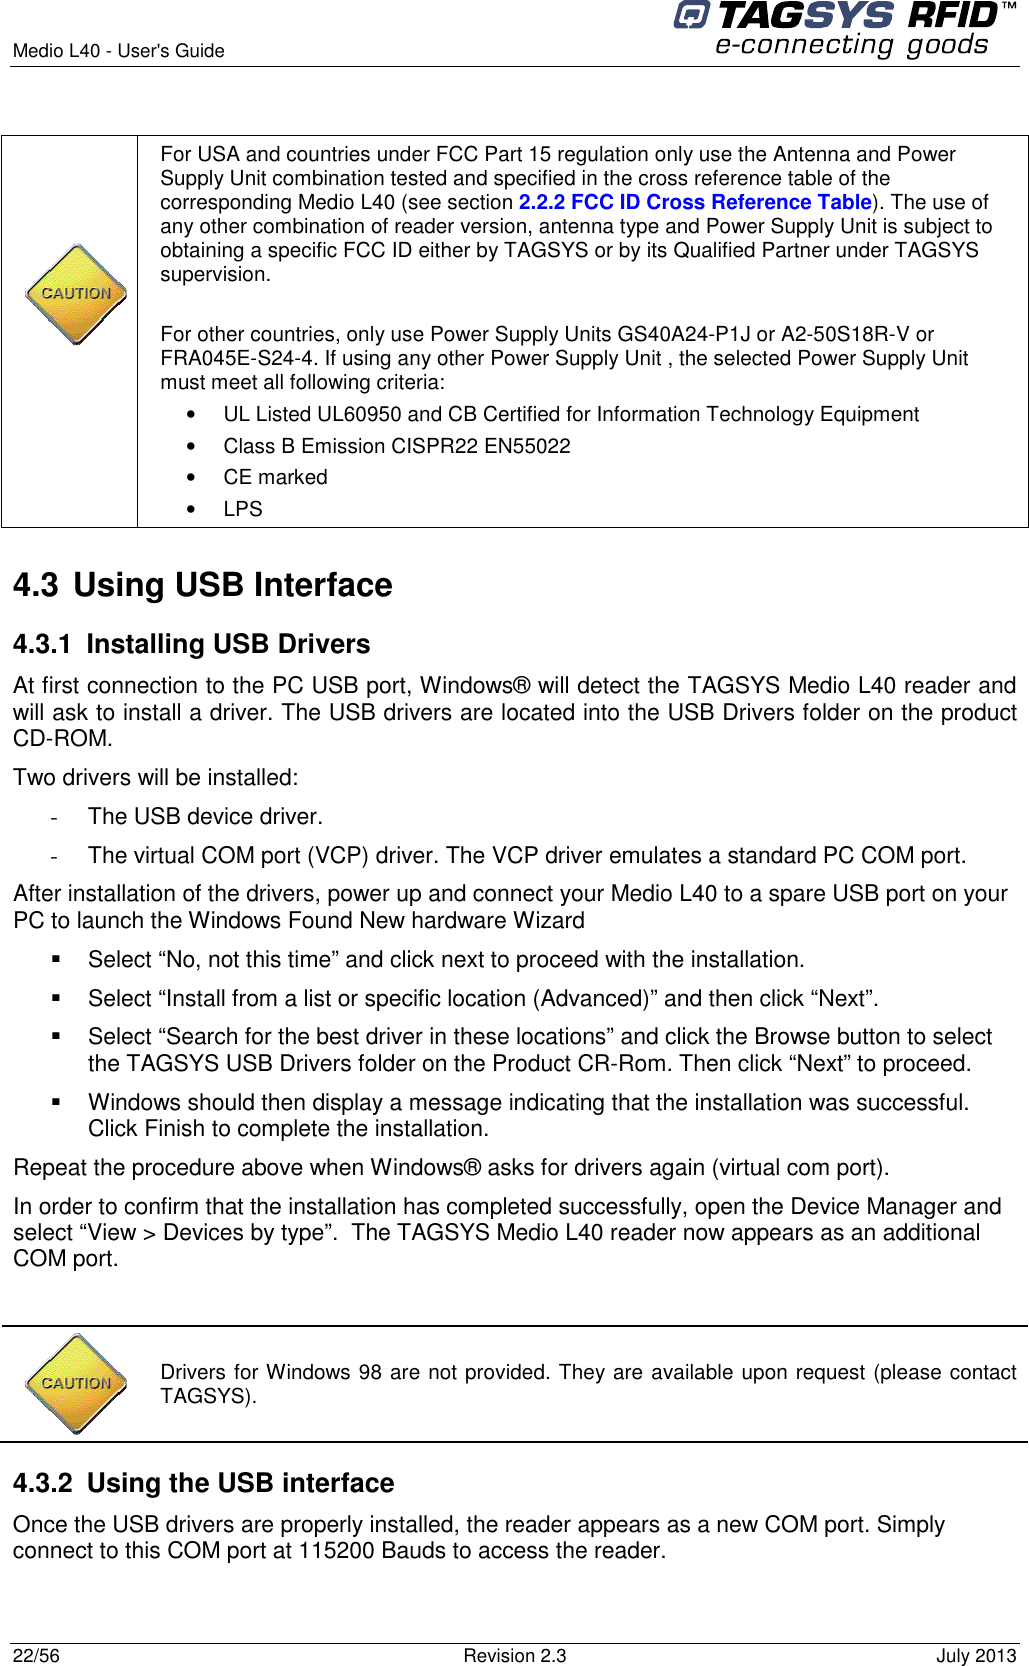  Medio L40 - User&apos;s Guide     22/56  Revision 2.3  July 2013         For USA and countries under FCC Part 15 regulation only use the Antenna and Power Supply Unit combination tested and specified in the cross reference table of the corresponding Medio L40 (see section 2.2.2 FCC ID Cross Reference Table). The use of any other combination of reader version, antenna type and Power Supply Unit is subject to obtaining a specific FCC ID either by TAGSYS or by its Qualified Partner under TAGSYS supervision.  For other countries, only use Power Supply Units GS40A24-P1J or A2-50S18R-V or FRA045E-S24-4. If using any other Power Supply Unit , the selected Power Supply Unit must meet all following criteria:  •  UL Listed UL60950 and CB Certified for Information Technology Equipment •  Class B Emission CISPR22 EN55022 •  CE marked •  LPS 4.3 Using USB Interface 4.3.1  Installing USB Drivers At first connection to the PC USB port, Windows® will detect the TAGSYS Medio L40 reader and will ask to install a driver. The USB drivers are located into the USB Drivers folder on the product CD-ROM. Two drivers will be installed: -  The USB device driver. -  The virtual COM port (VCP) driver. The VCP driver emulates a standard PC COM port. After installation of the drivers, power up and connect your Medio L40 to a spare USB port on your PC to launch the Windows Found New hardware Wizard   Select “No, not this time” and click next to proceed with the installation.   Select “Install from a list or specific location (Advanced)” and then click “Next”.   Select “Search for the best driver in these locations” and click the Browse button to select the TAGSYS USB Drivers folder on the Product CR-Rom. Then click “Next” to proceed.   Windows should then display a message indicating that the installation was successful. Click Finish to complete the installation. Repeat the procedure above when Windows® asks for drivers again (virtual com port). In order to confirm that the installation has completed successfully, open the Device Manager and select “View &gt; Devices by type”.  The TAGSYS Medio L40 reader now appears as an additional COM port.   4.3.2  Using the USB interface Once the USB drivers are properly installed, the reader appears as a new COM port. Simply connect to this COM port at 115200 Bauds to access the reader.   Drivers for Windows 98 are not provided. They are available upon request (please contact TAGSYS). 